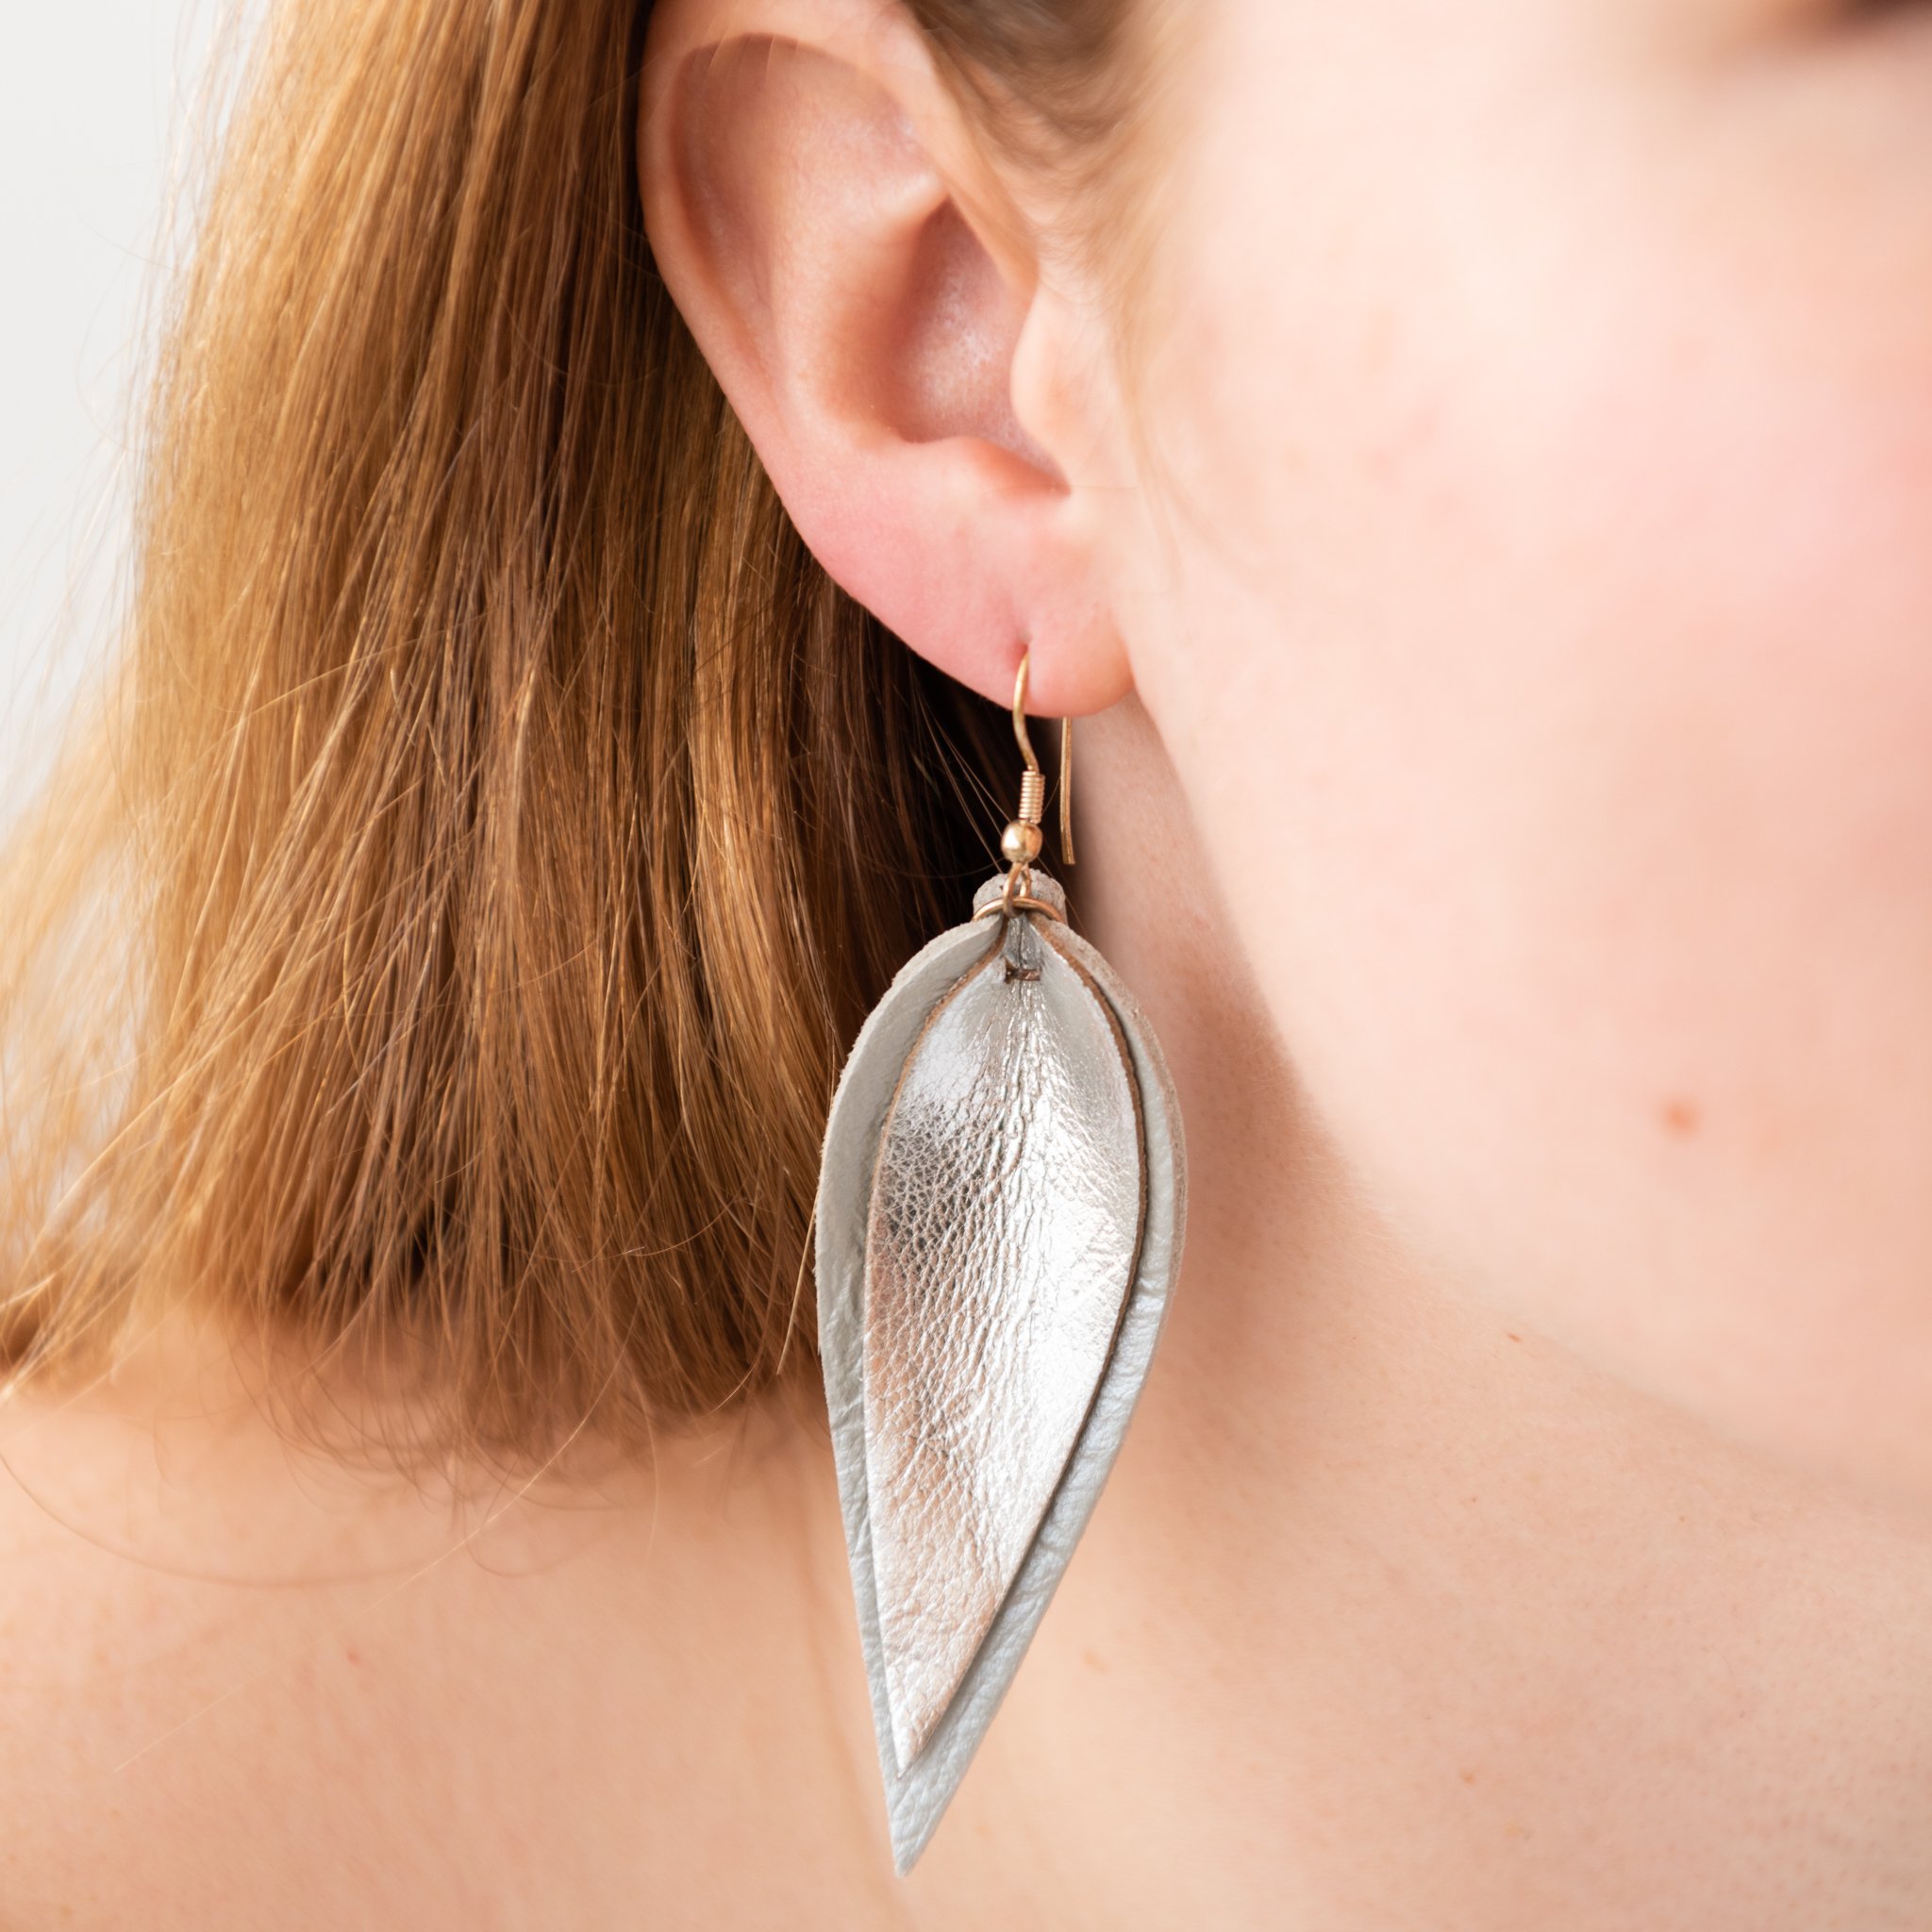 White Birch Large Leather Leaf Earrings Grey Skies Textured  Starlet